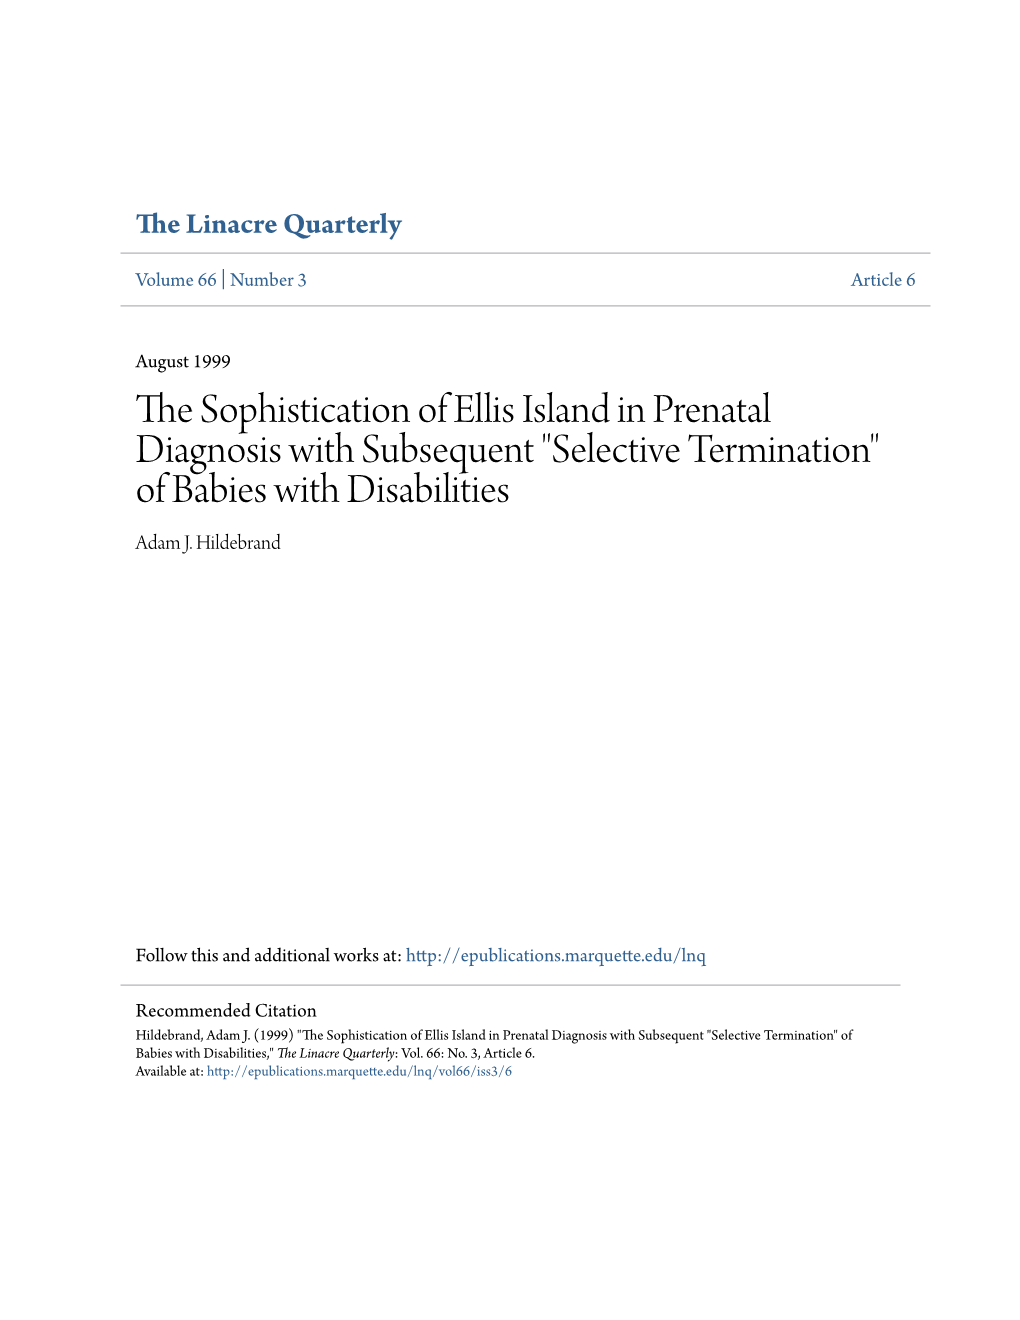 The Sophistication of Ellis Island in Prenatal Diagnosis with Subsequent "Selective Termination" of Babies with Disabilities